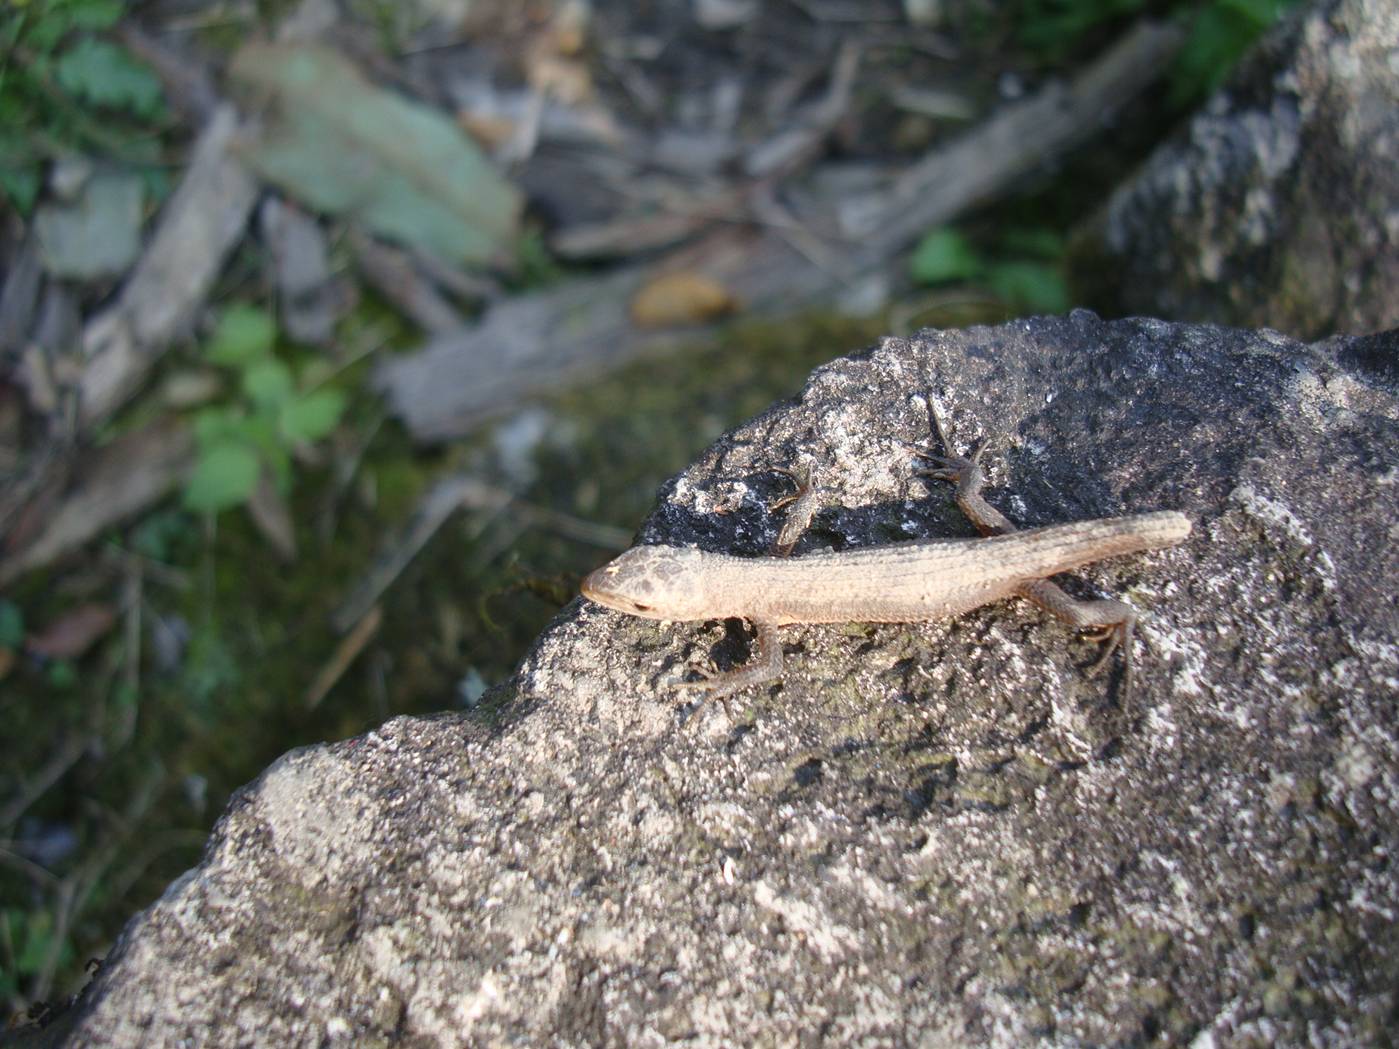 Picture:  A three inch lizard basking on a rock beside the path to the headwaters of Lake Tai, Zhejiang Province, China